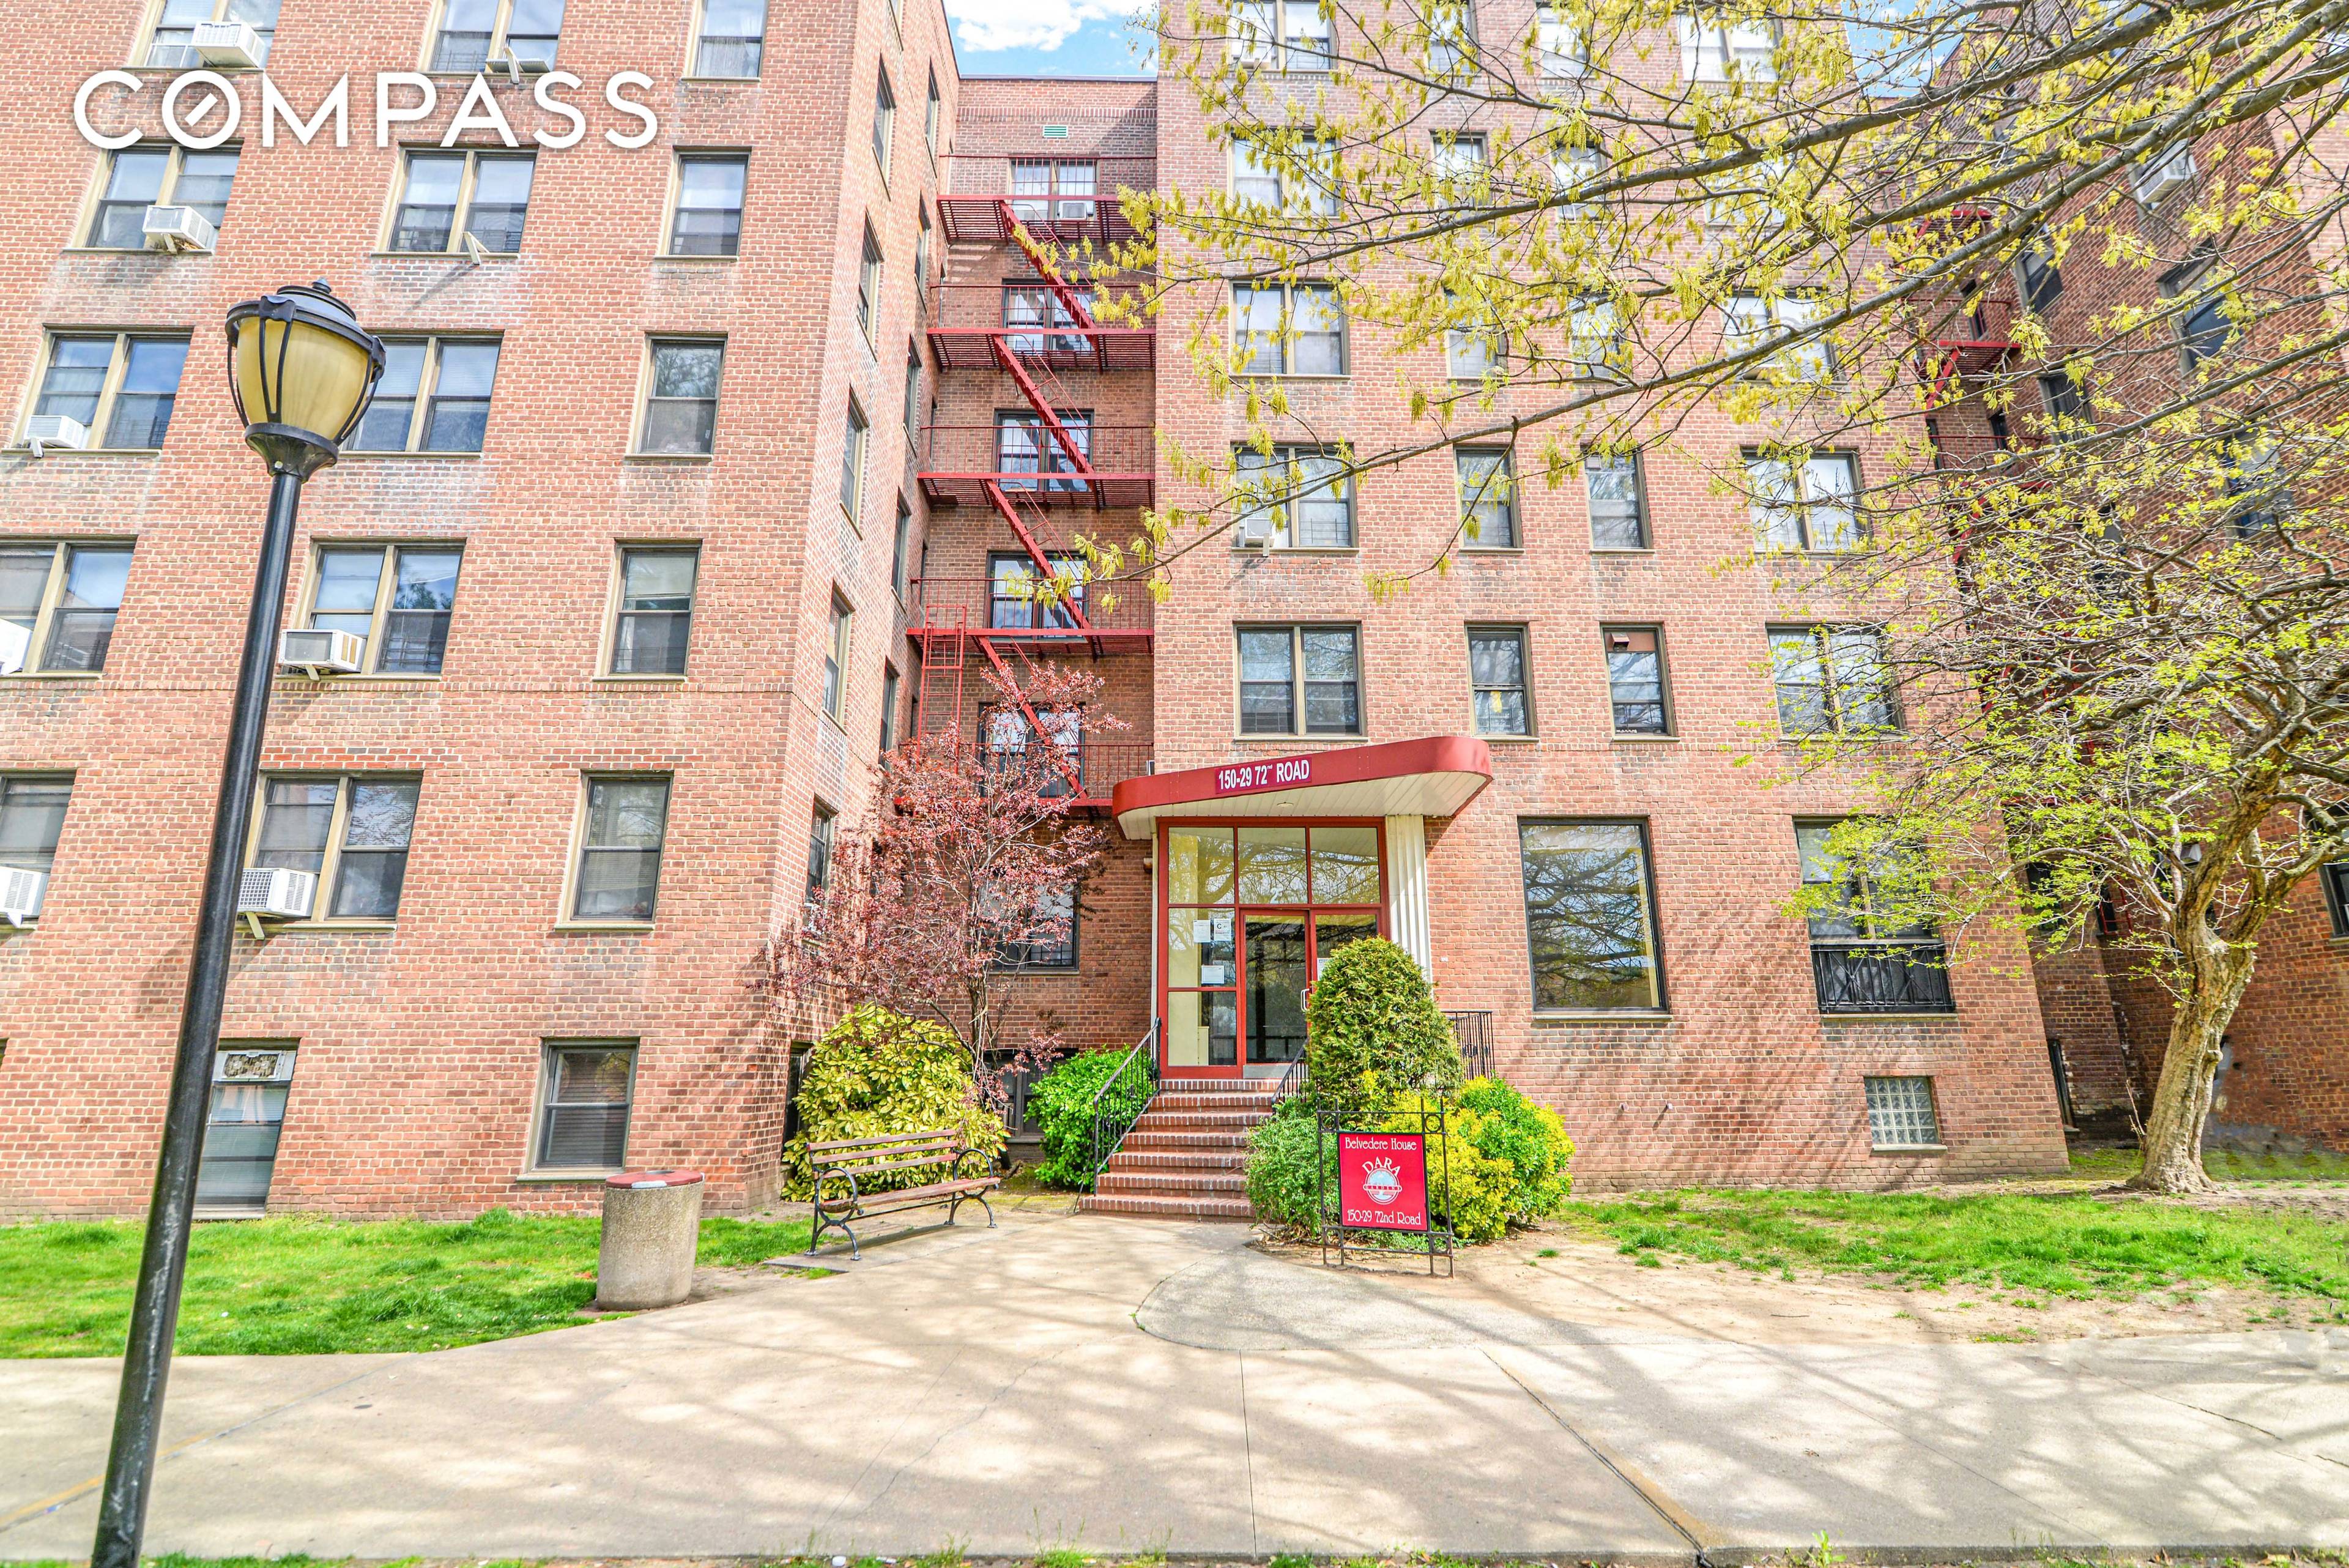 Located in 24 hours Gated Coop community of Kew Garden Hills, Southern Exposure Sunny apartment, hardwood flooring and updated kitchen with Stainless Steel appliances, price includes 1 assigned indoor parking.